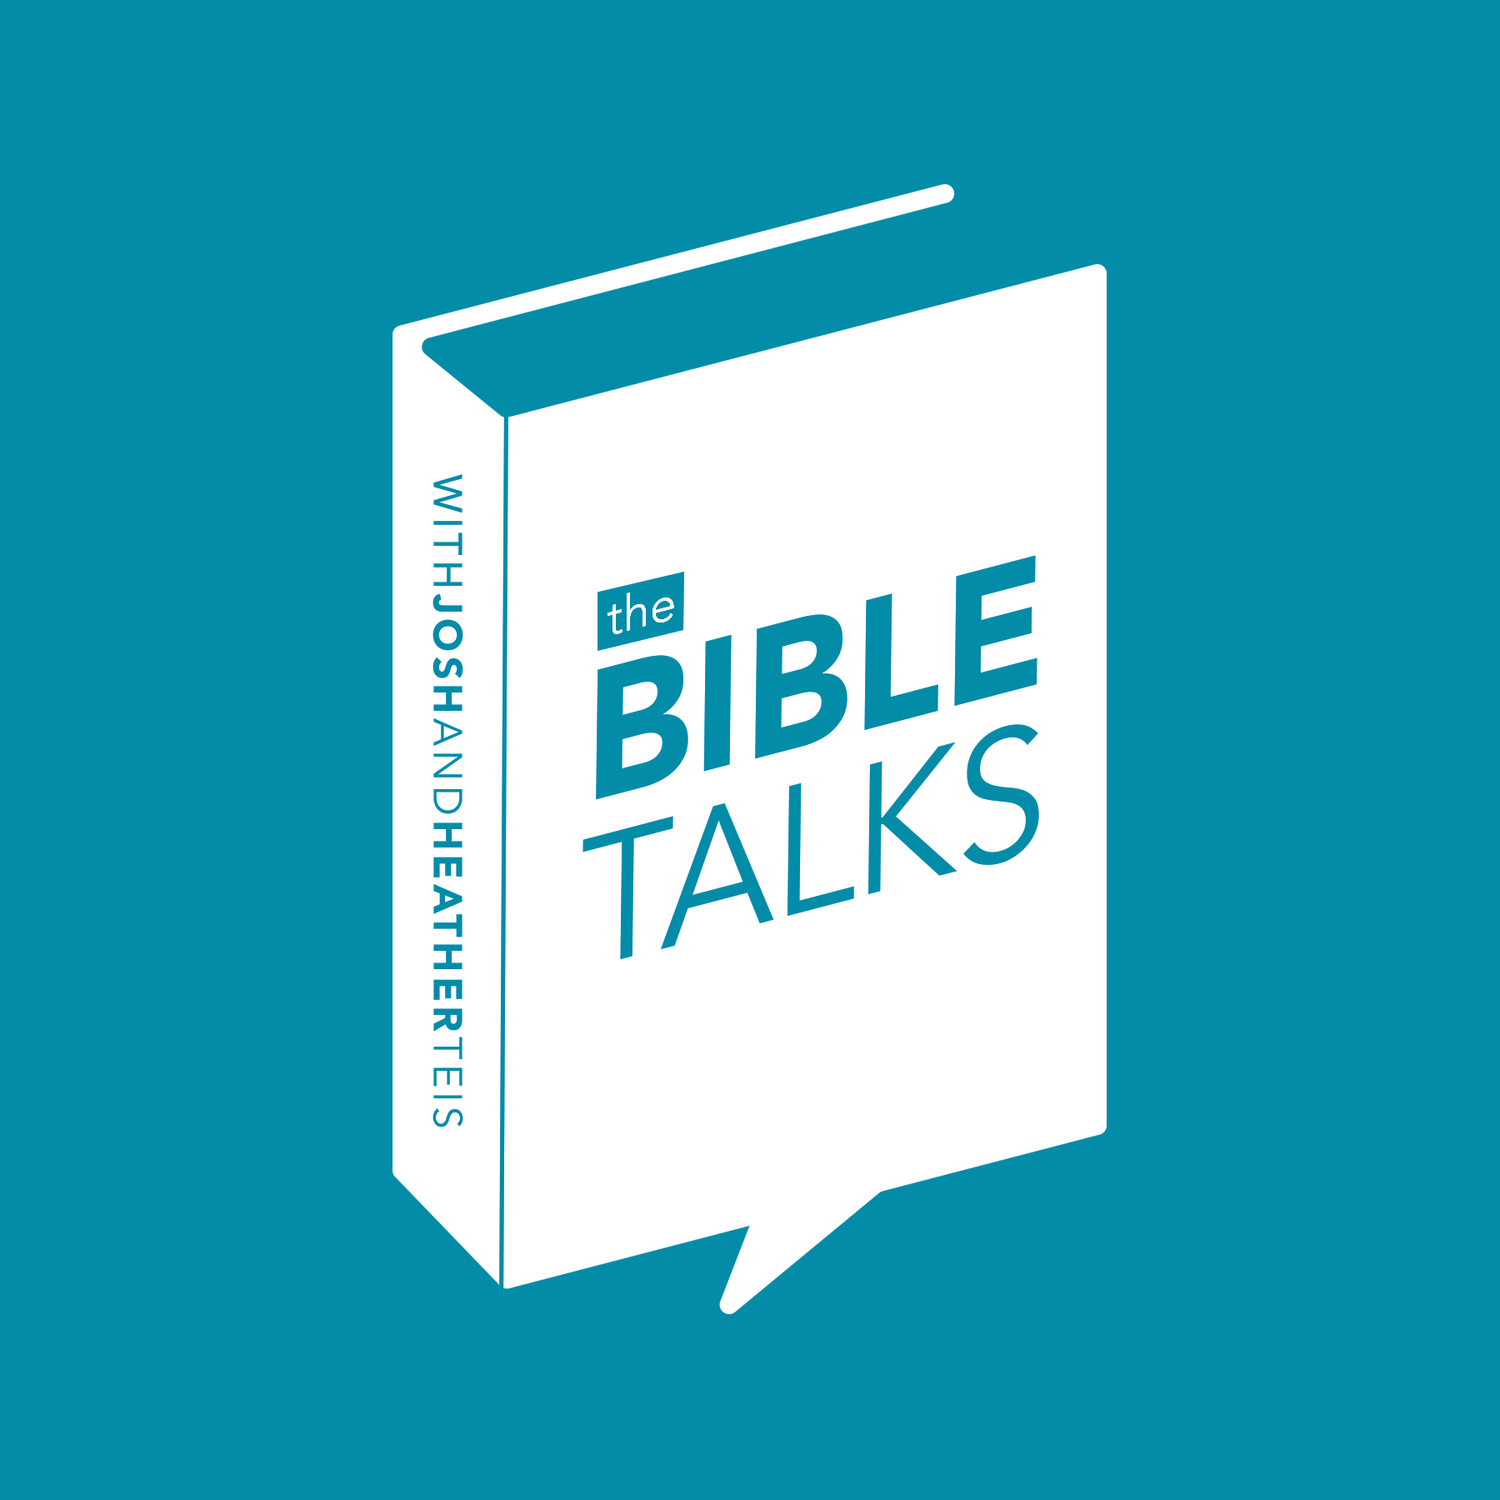 The Bible Talks Podcast